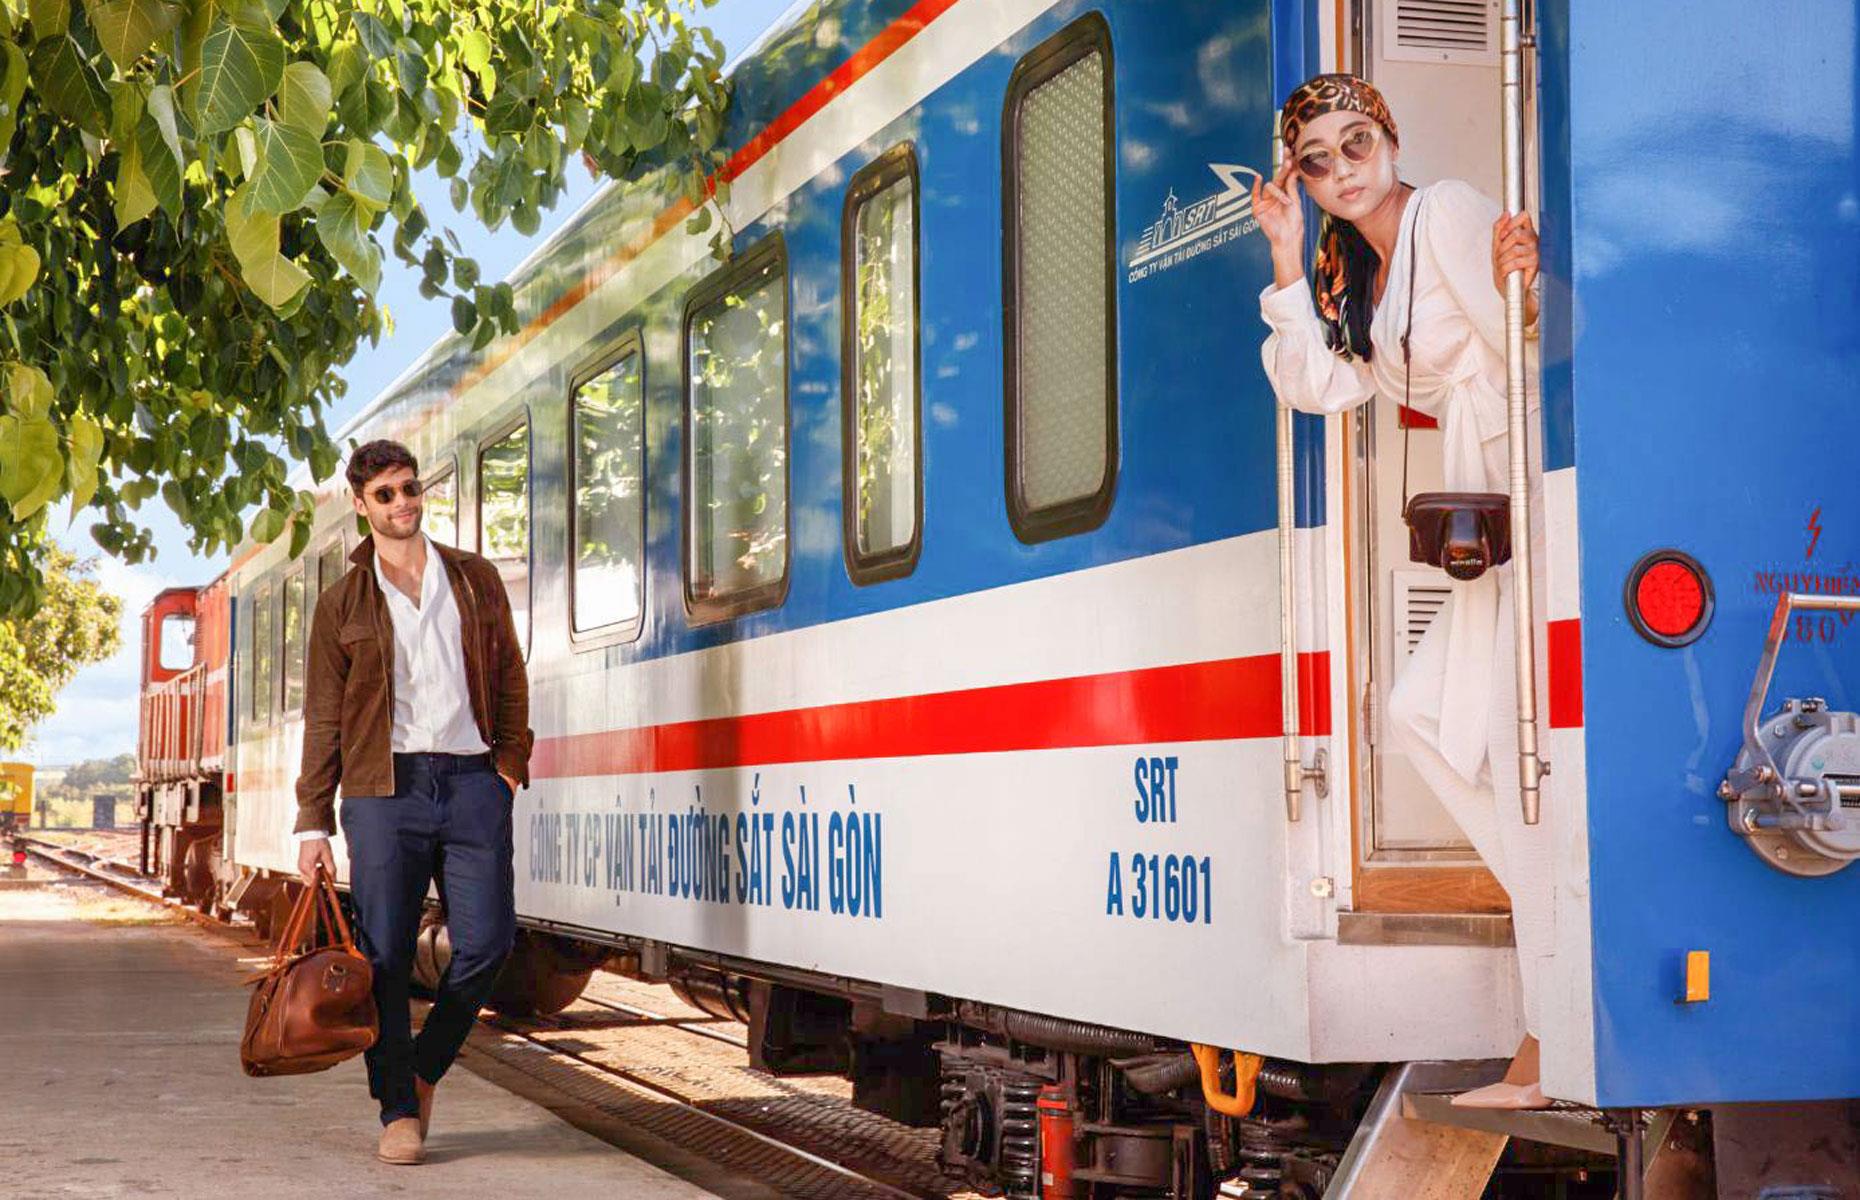 <p>Described as Vietnam's premier rail experience, <em>The Vietage</em> offers one of the world's most extravagant rail excursions.</p>  <p>Its two elegant train carriages seat 12 guests apiece and are each available to hire in their entirety from a hefty $2,750 (£2,164) for a six-hour one-way trip, according to Luxury Train Club.</p>  <p>Launched in 2020 by hotel group Anantara, the superlative service runs from historic Hoi An to the coastal resort of Quy Nhon (198 miles/319km to the south). It's recently added beach destination Nha Trang to its destination list.</p>